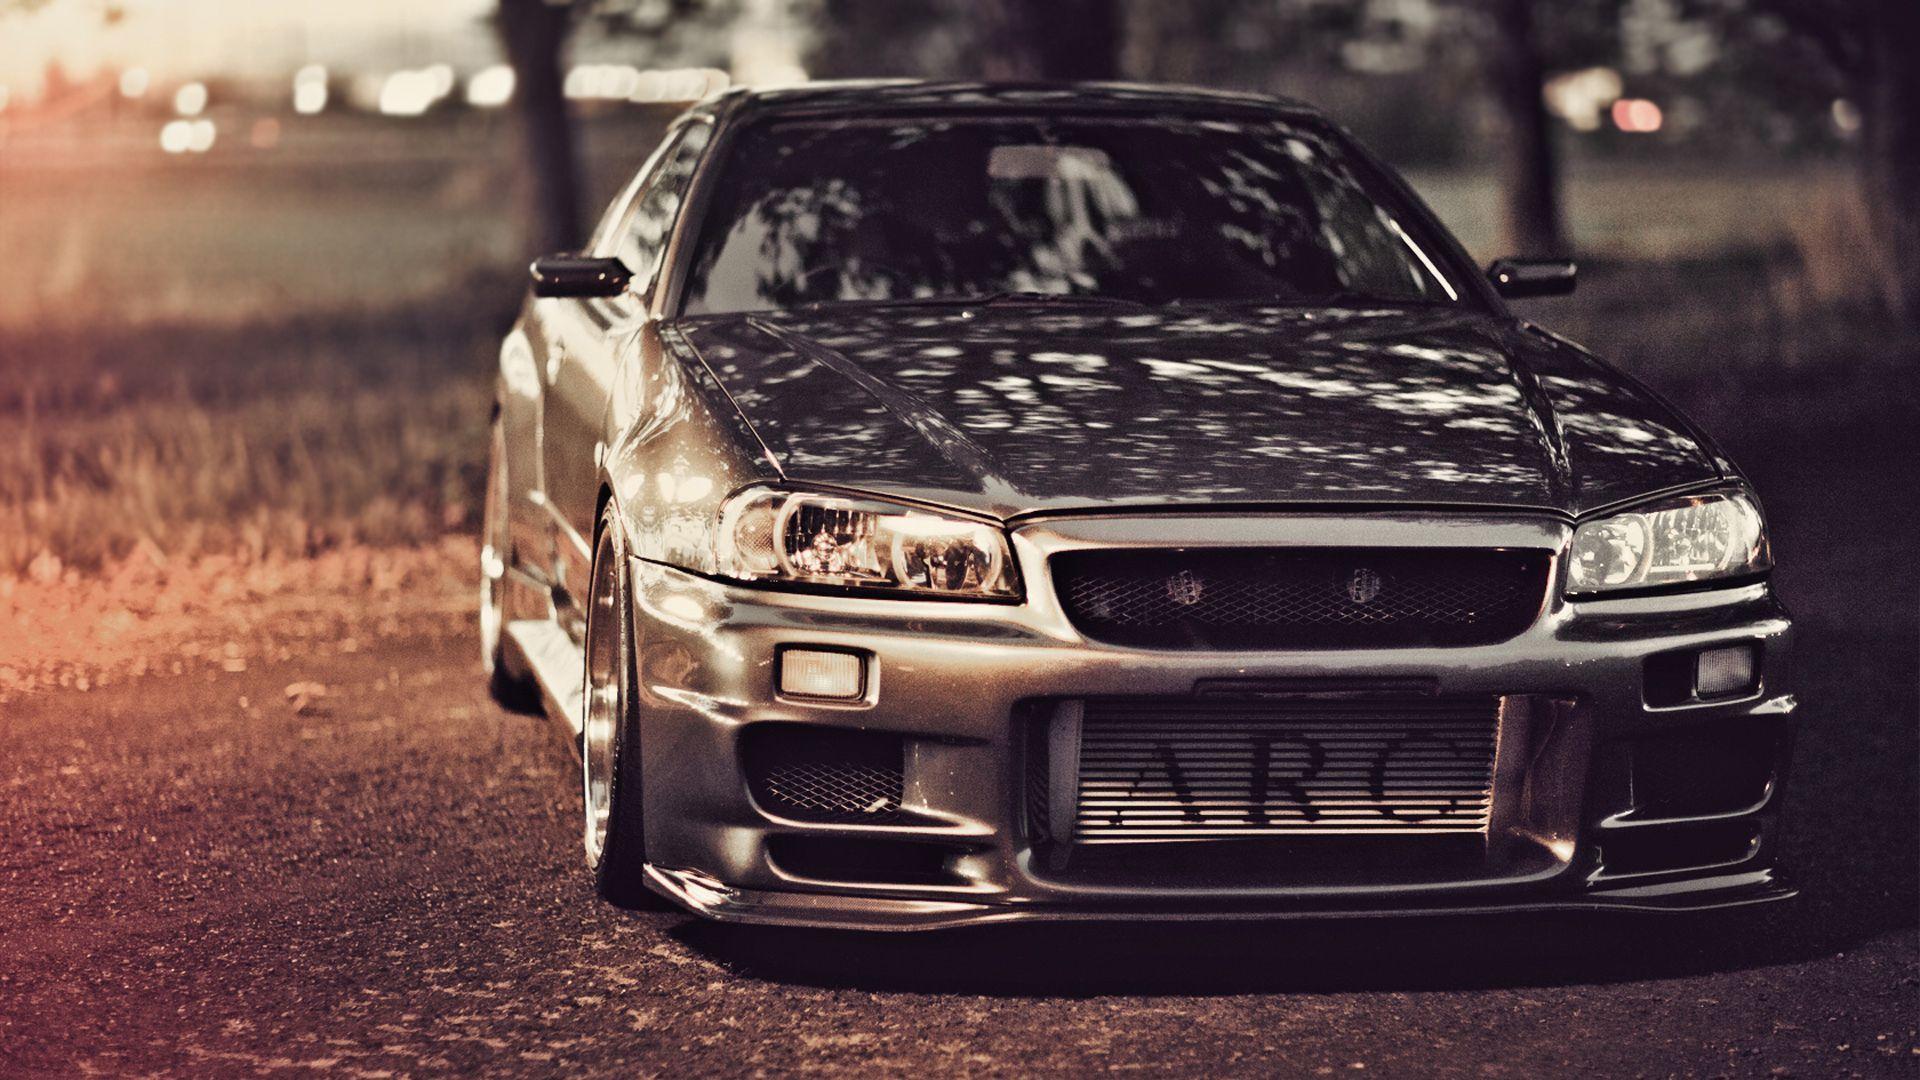 20 Nissan Skyline R34 HD Wallpapers and Backgrounds